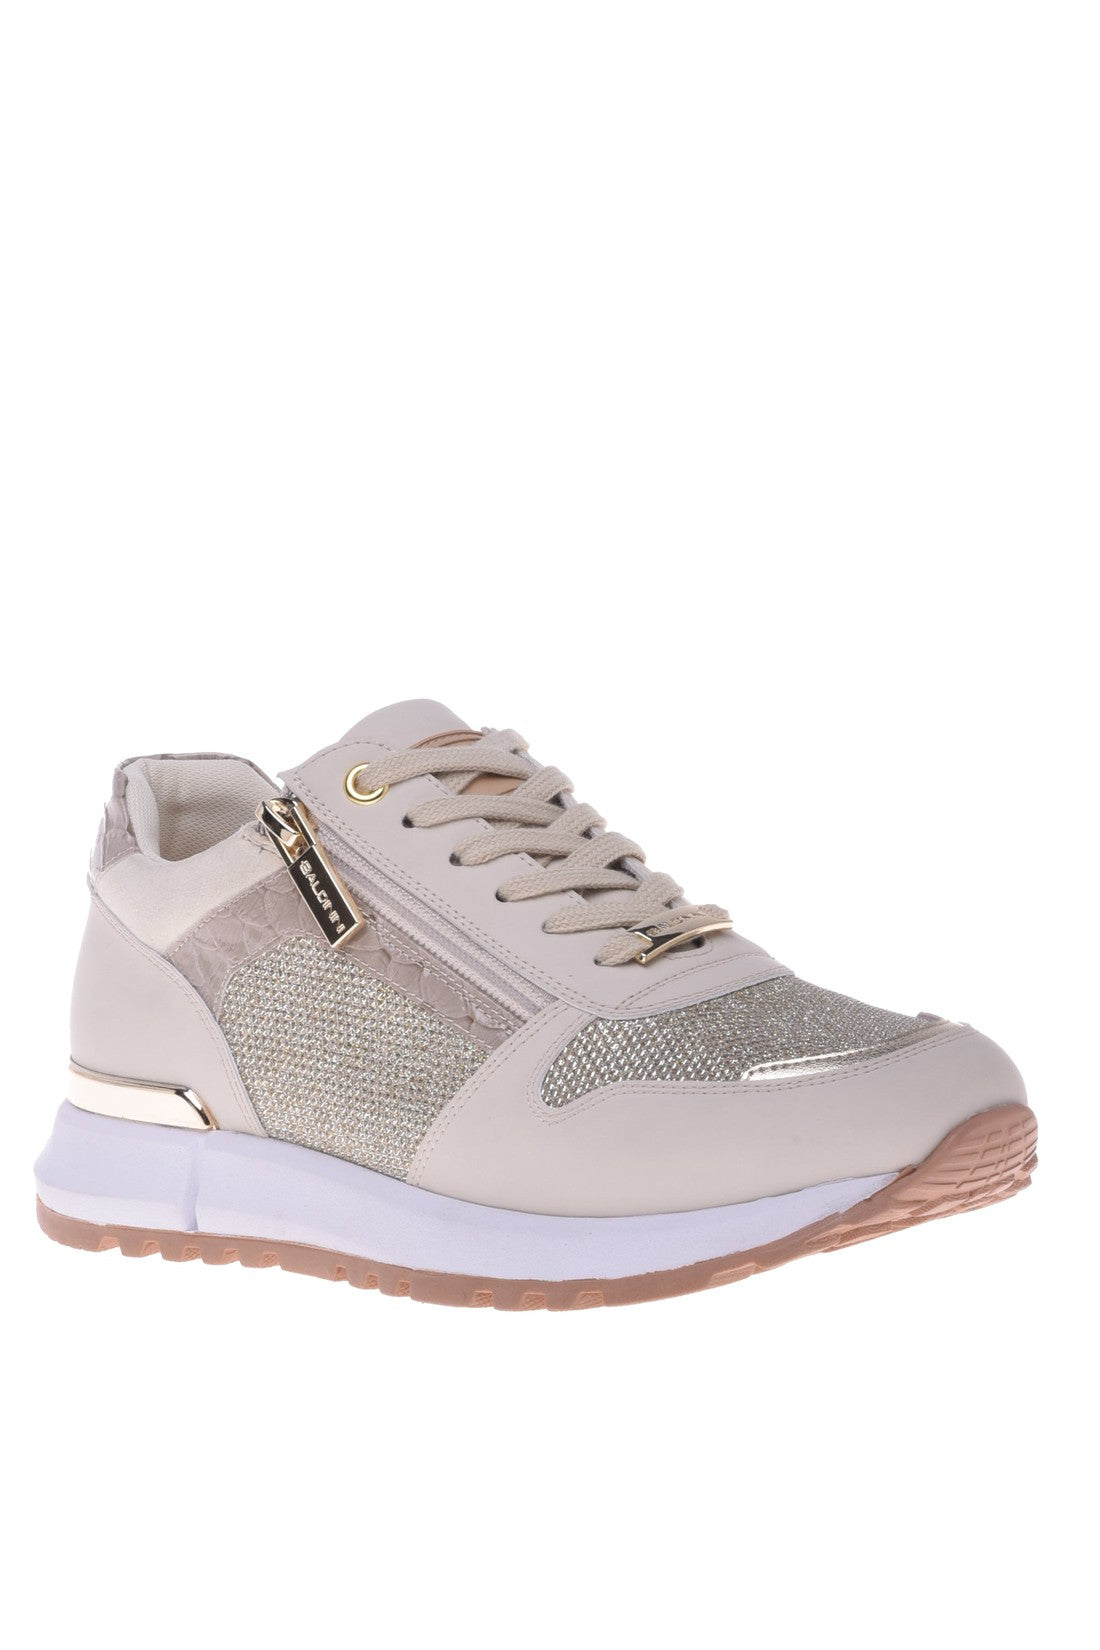 BALDININI-OUTLET-SALE-Sneaker-in-beige-and-platinum-nappa-leather-and-fabric-Sneaker-35-ARCHIVE-COLLECTION.jpg